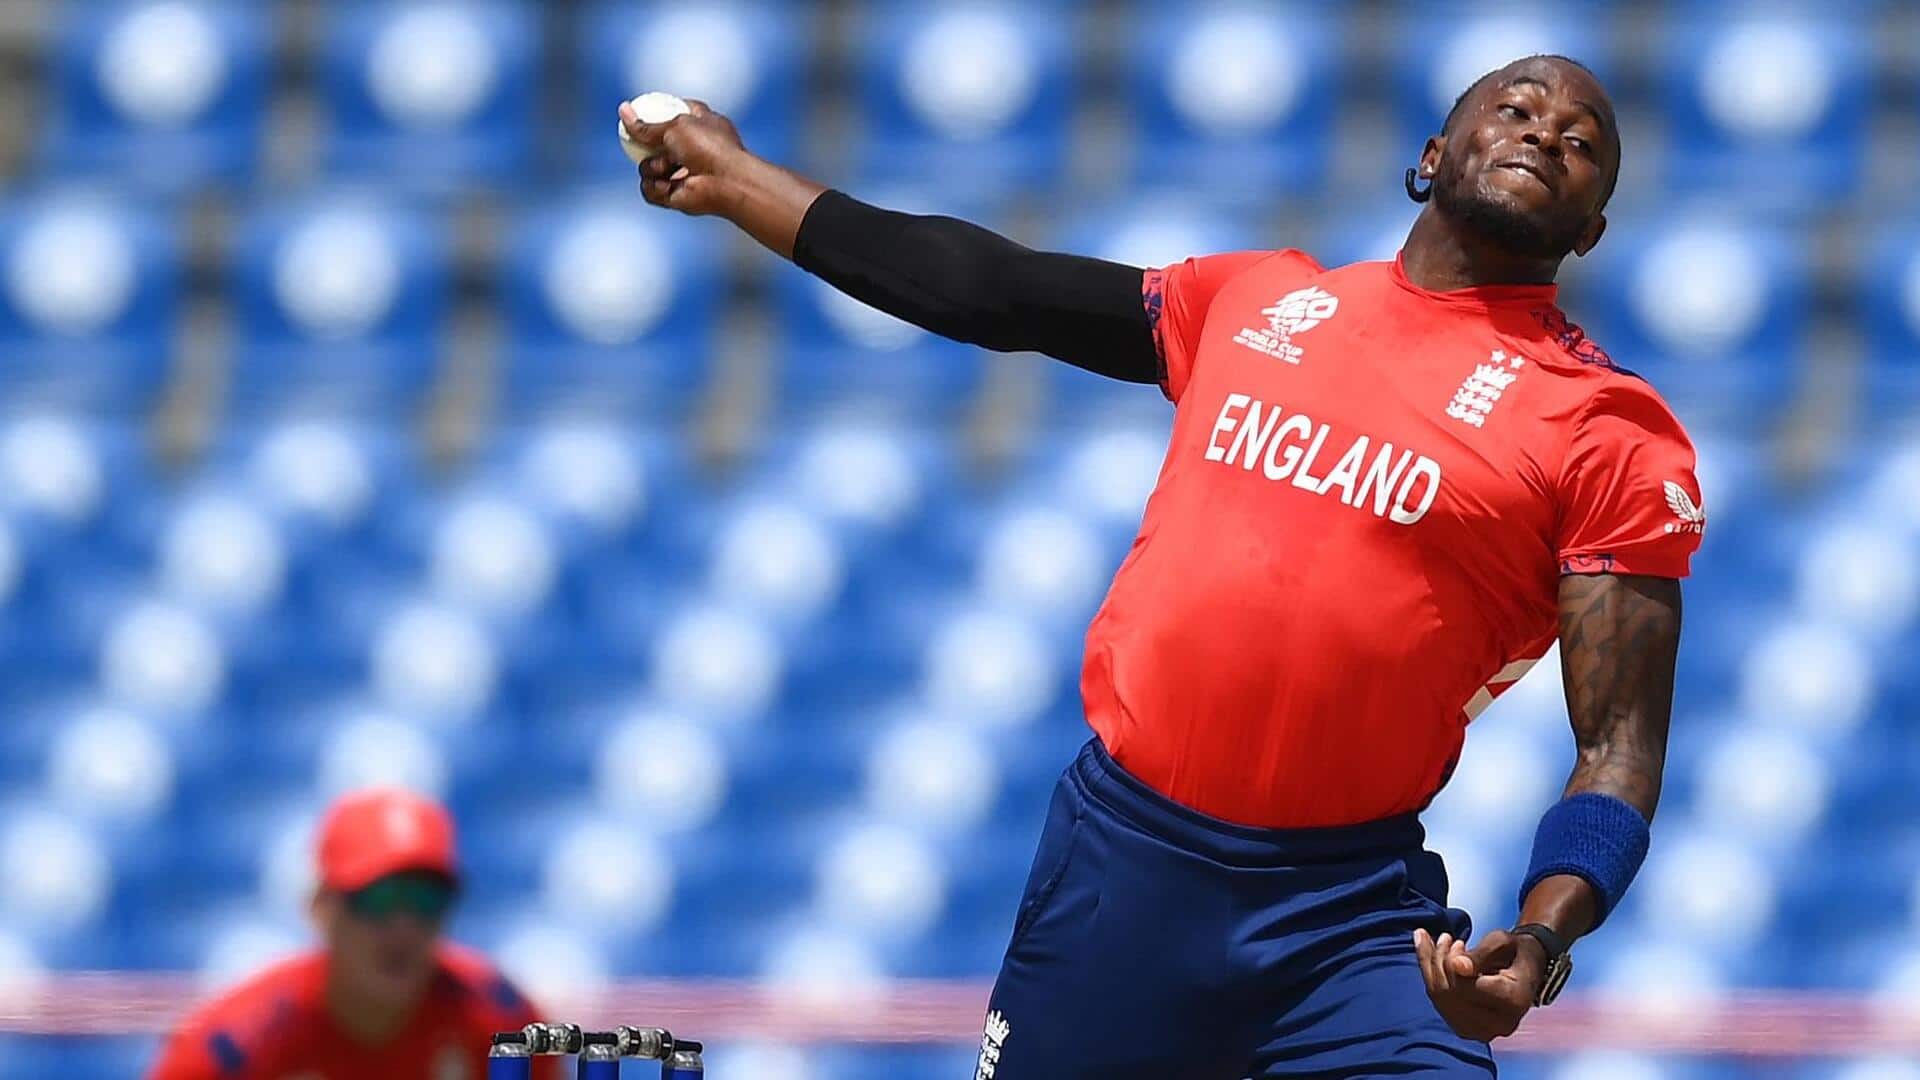 T20 WC, England's Jofra Archer claims 3/40 versus SA: Stats